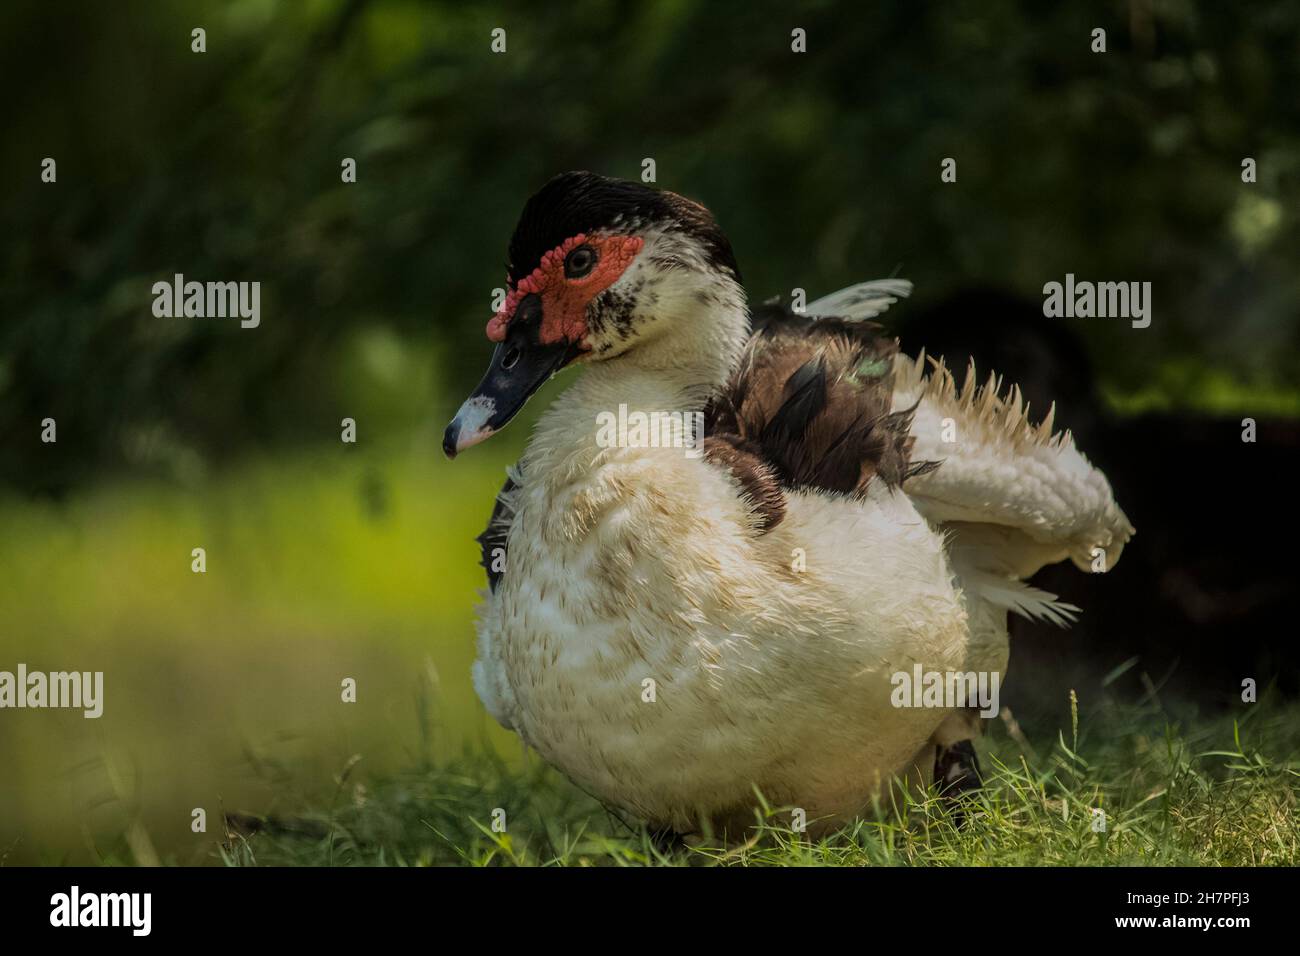 The Beautiful Indian domestic duck is drying its body in the sun, this duck is a group of Indian runner ducks . Stock Photo